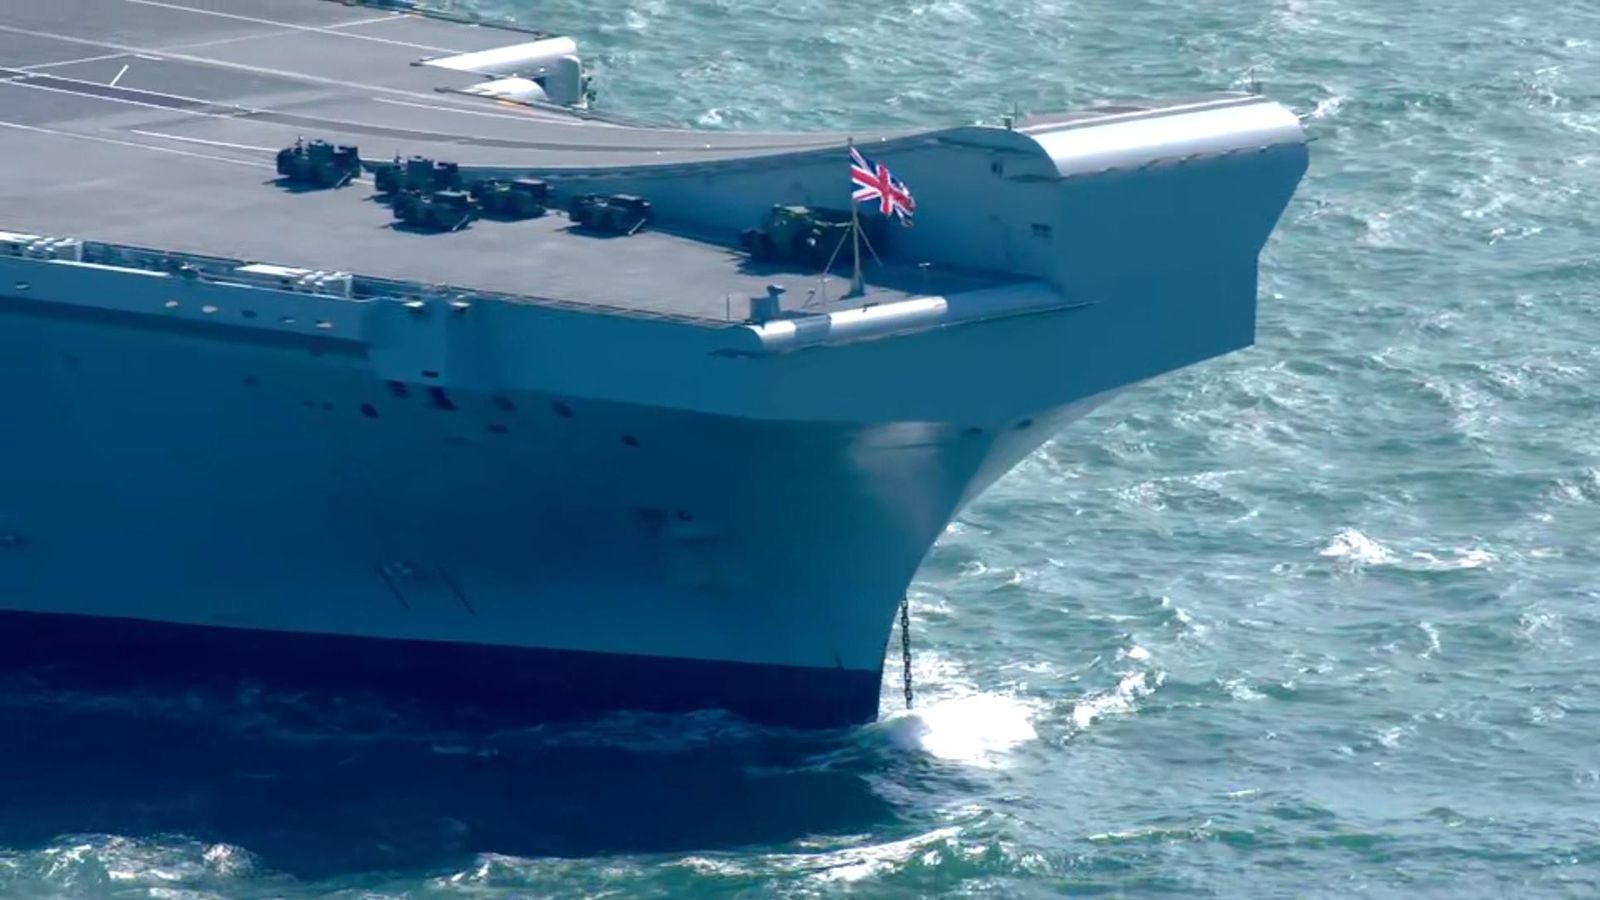 The 65,000-tonne ship is experiencing an 'emerging mechanical issue'  according to a Royal Navy spokesperson.